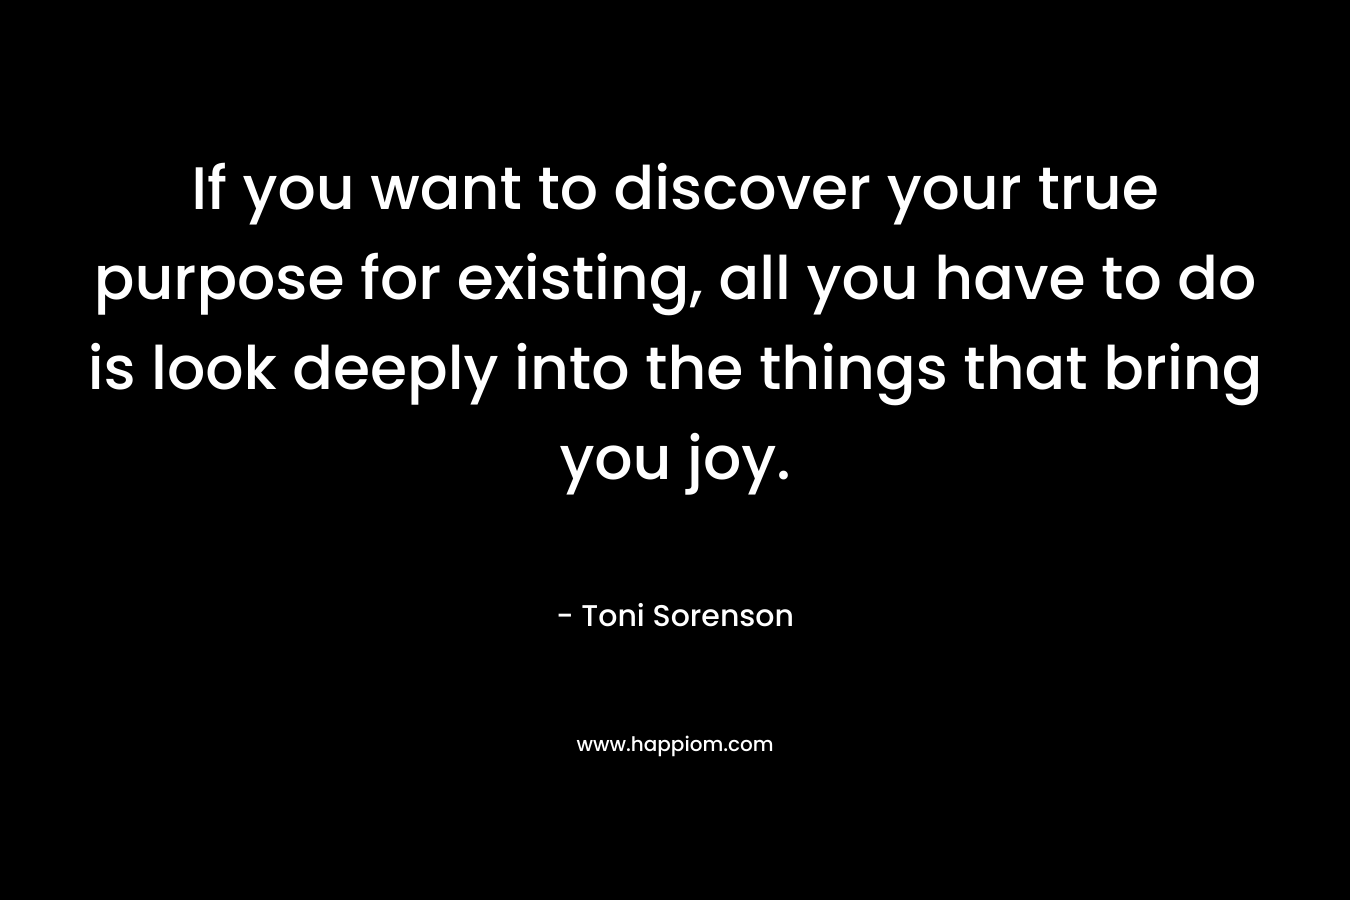 If you want to discover your true purpose for existing, all you have to do is look deeply into the things that bring you joy.